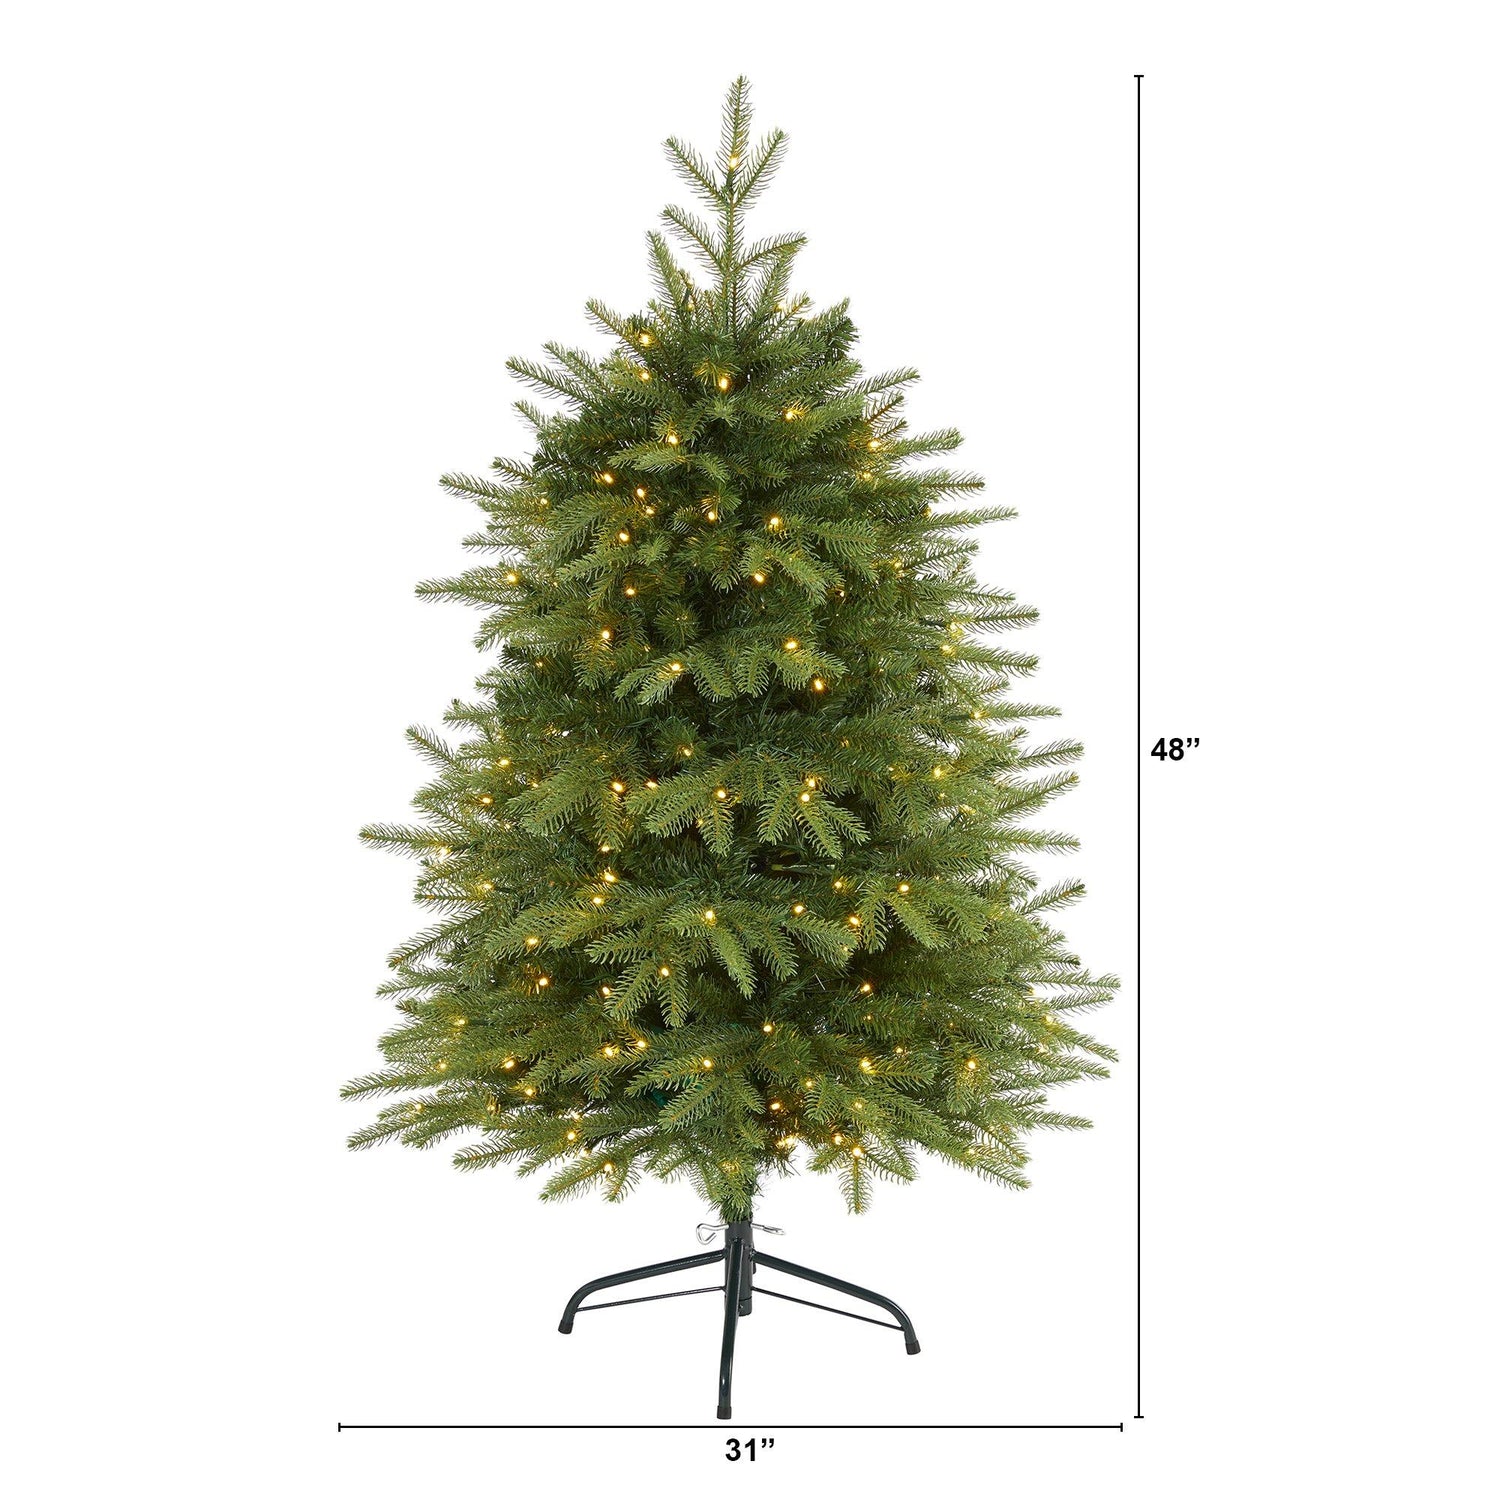 4’ Vancouver Fir “Natural Look” Artificial Christmas Tree with 250 Clear LED Lights and 814 Bendable Branches